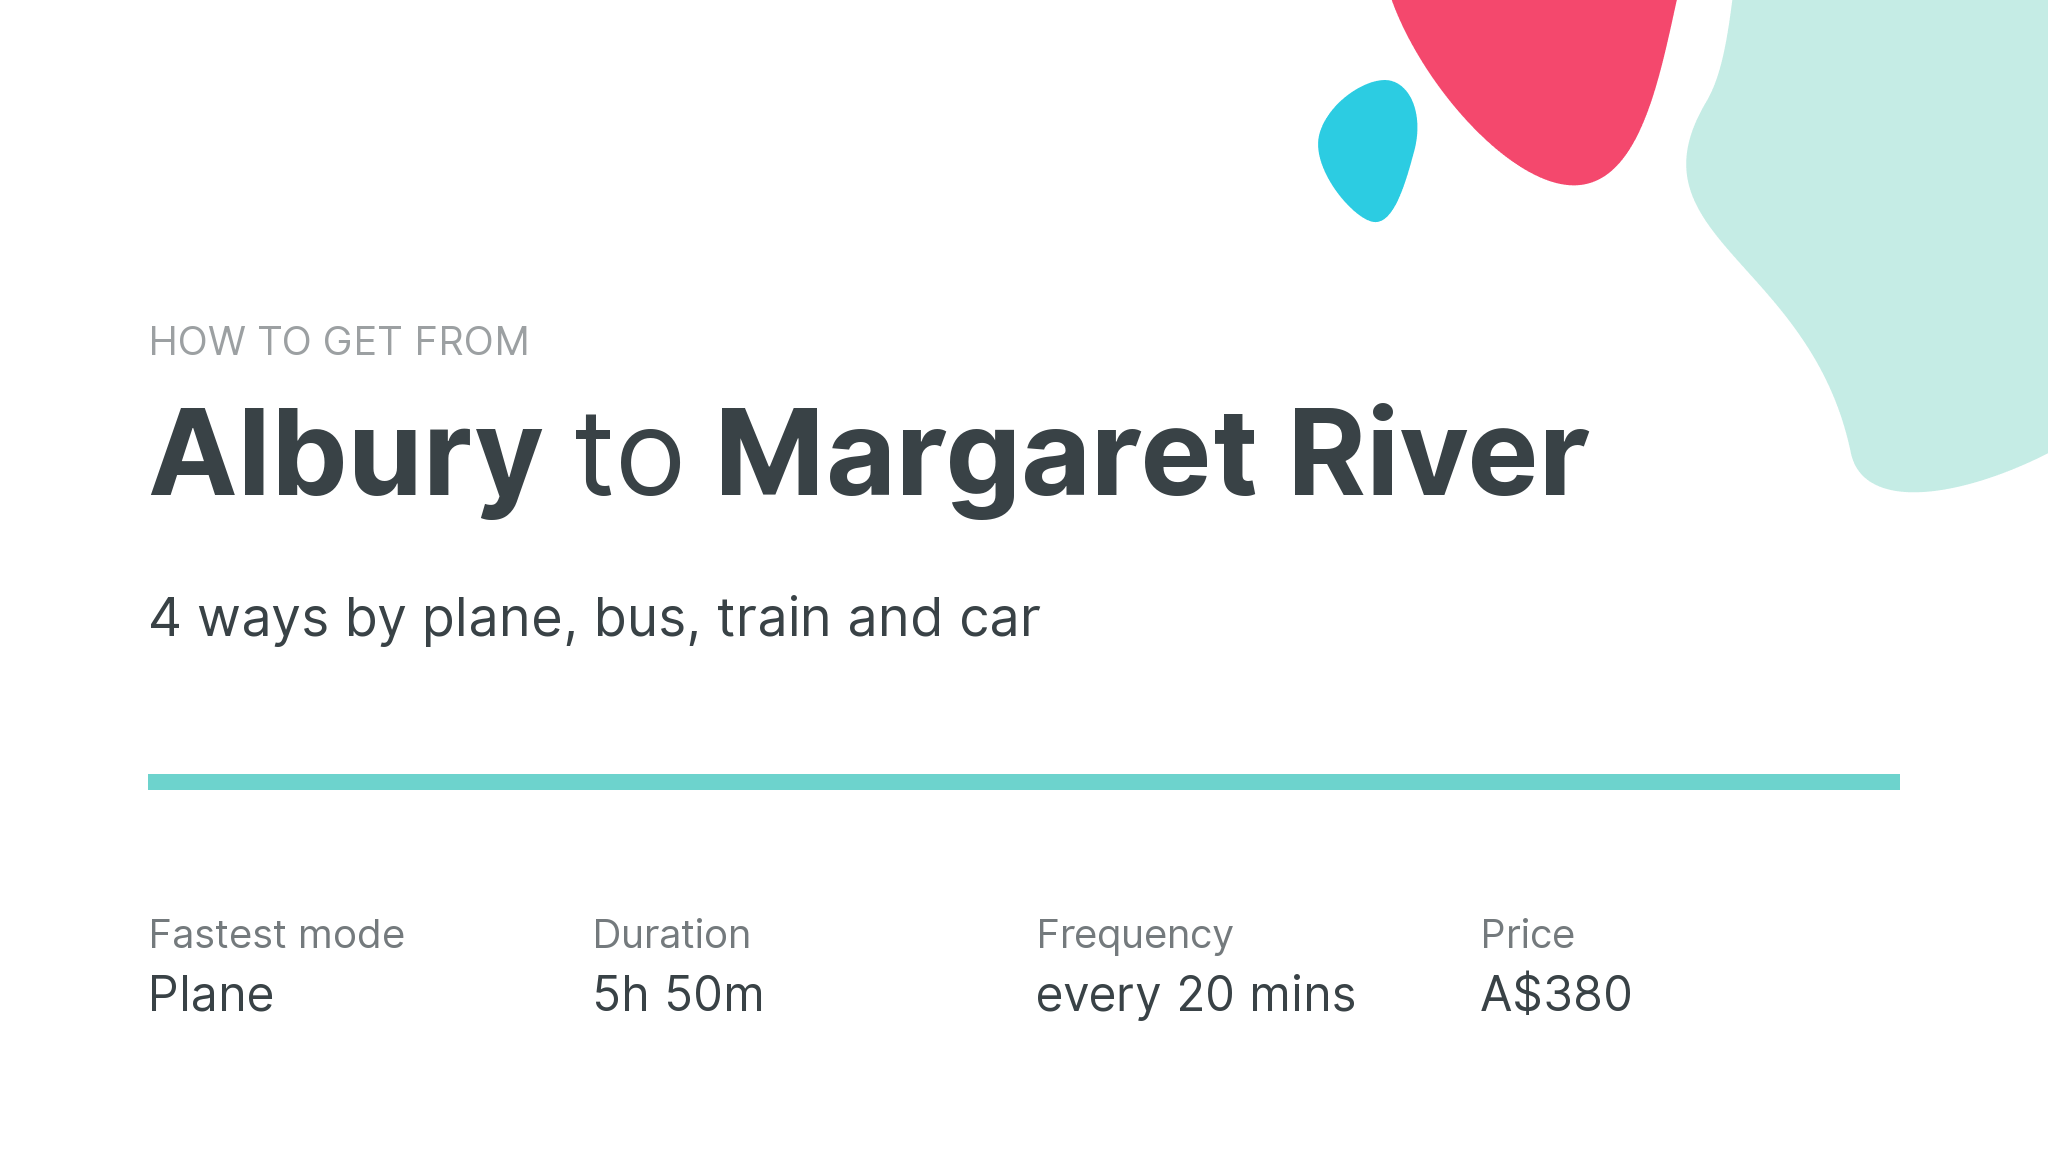 How do I get from Albury to Margaret River